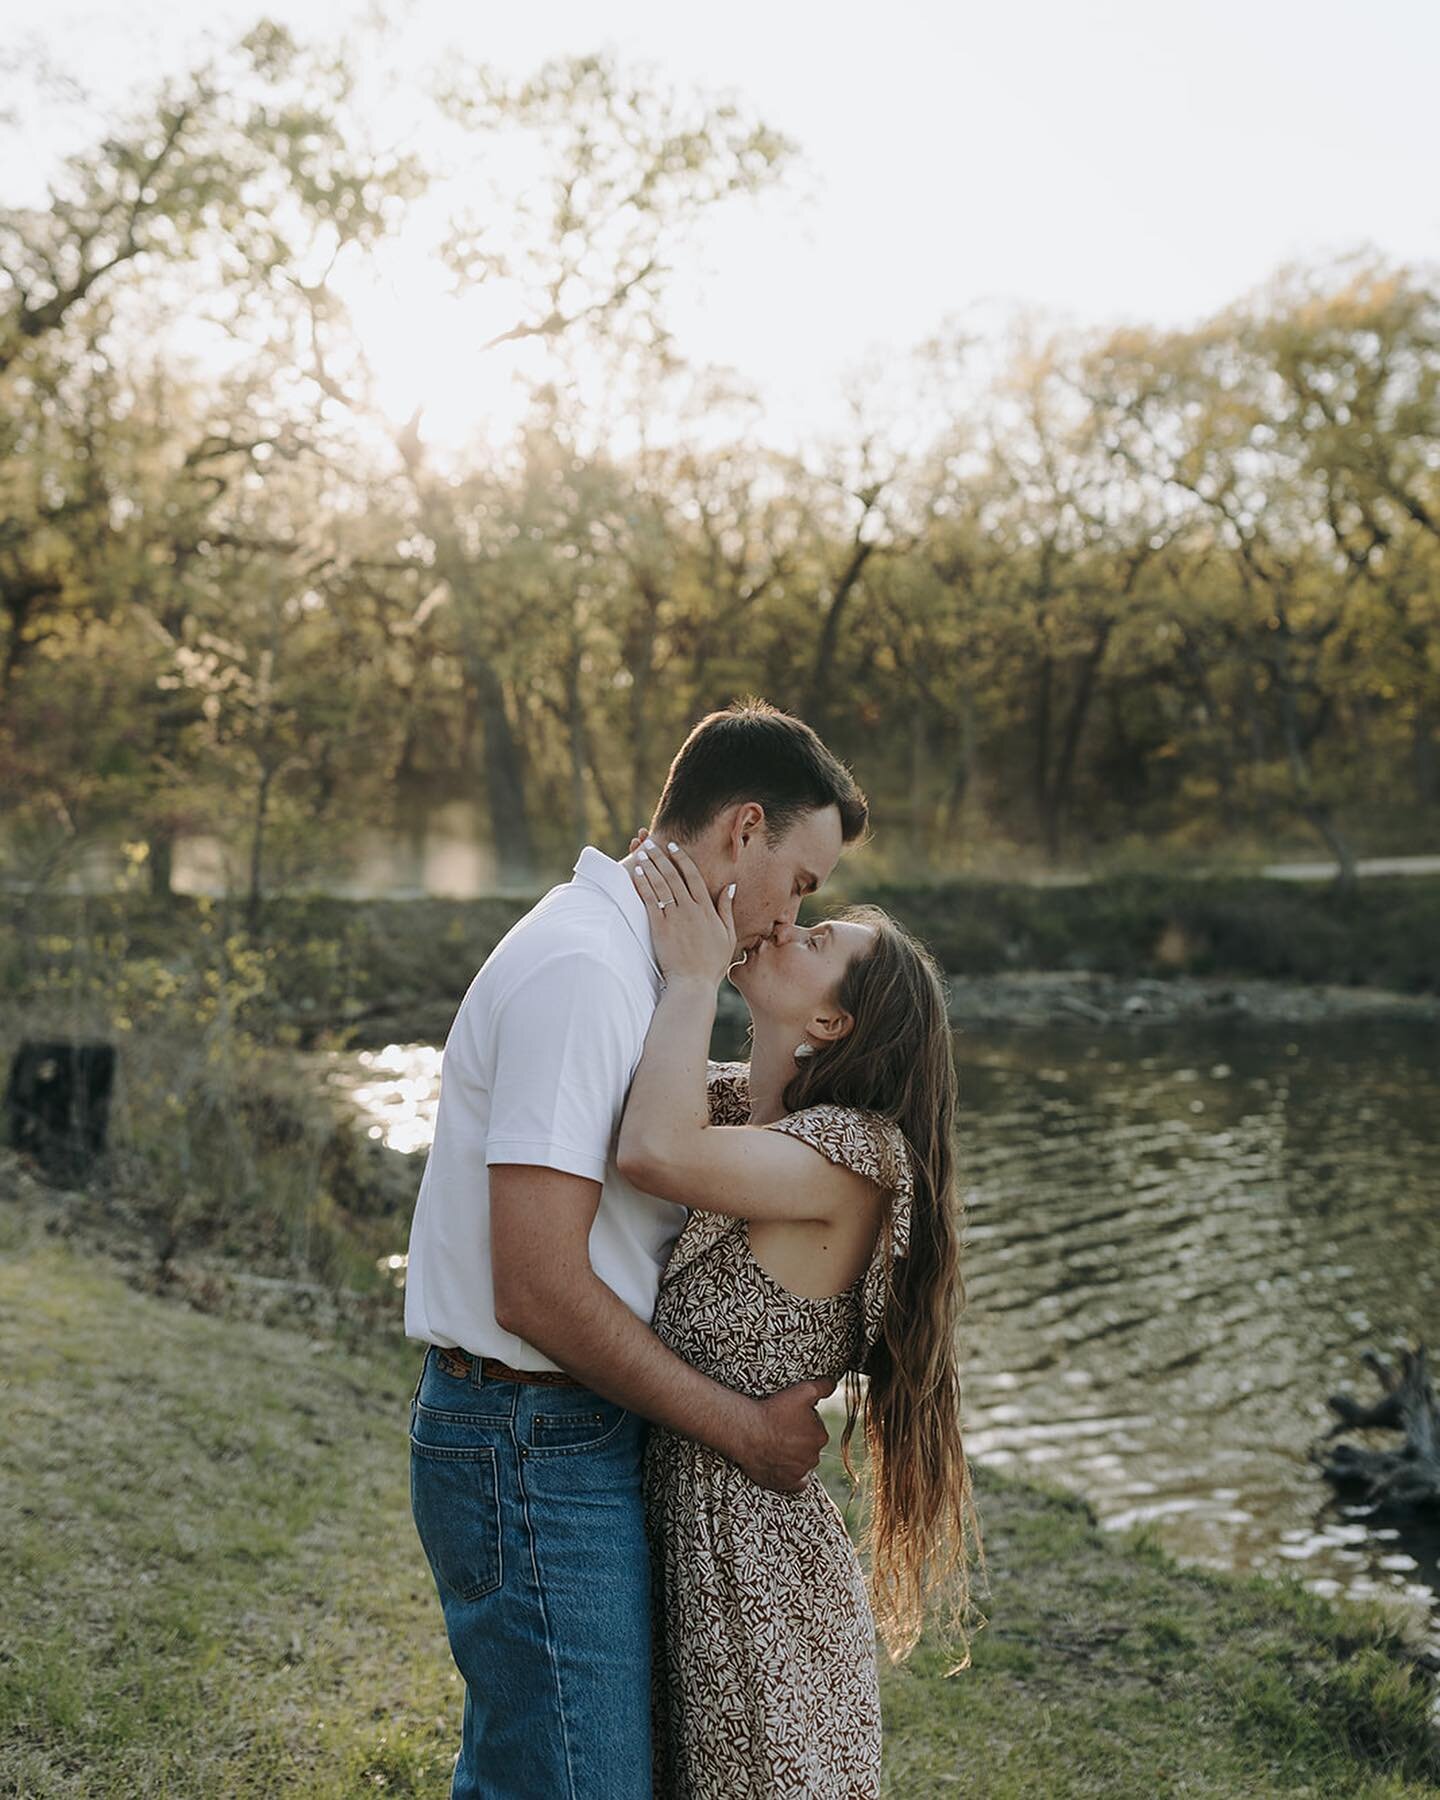 Some moments from Kyle and Elise&rsquo;s engagement session last week.